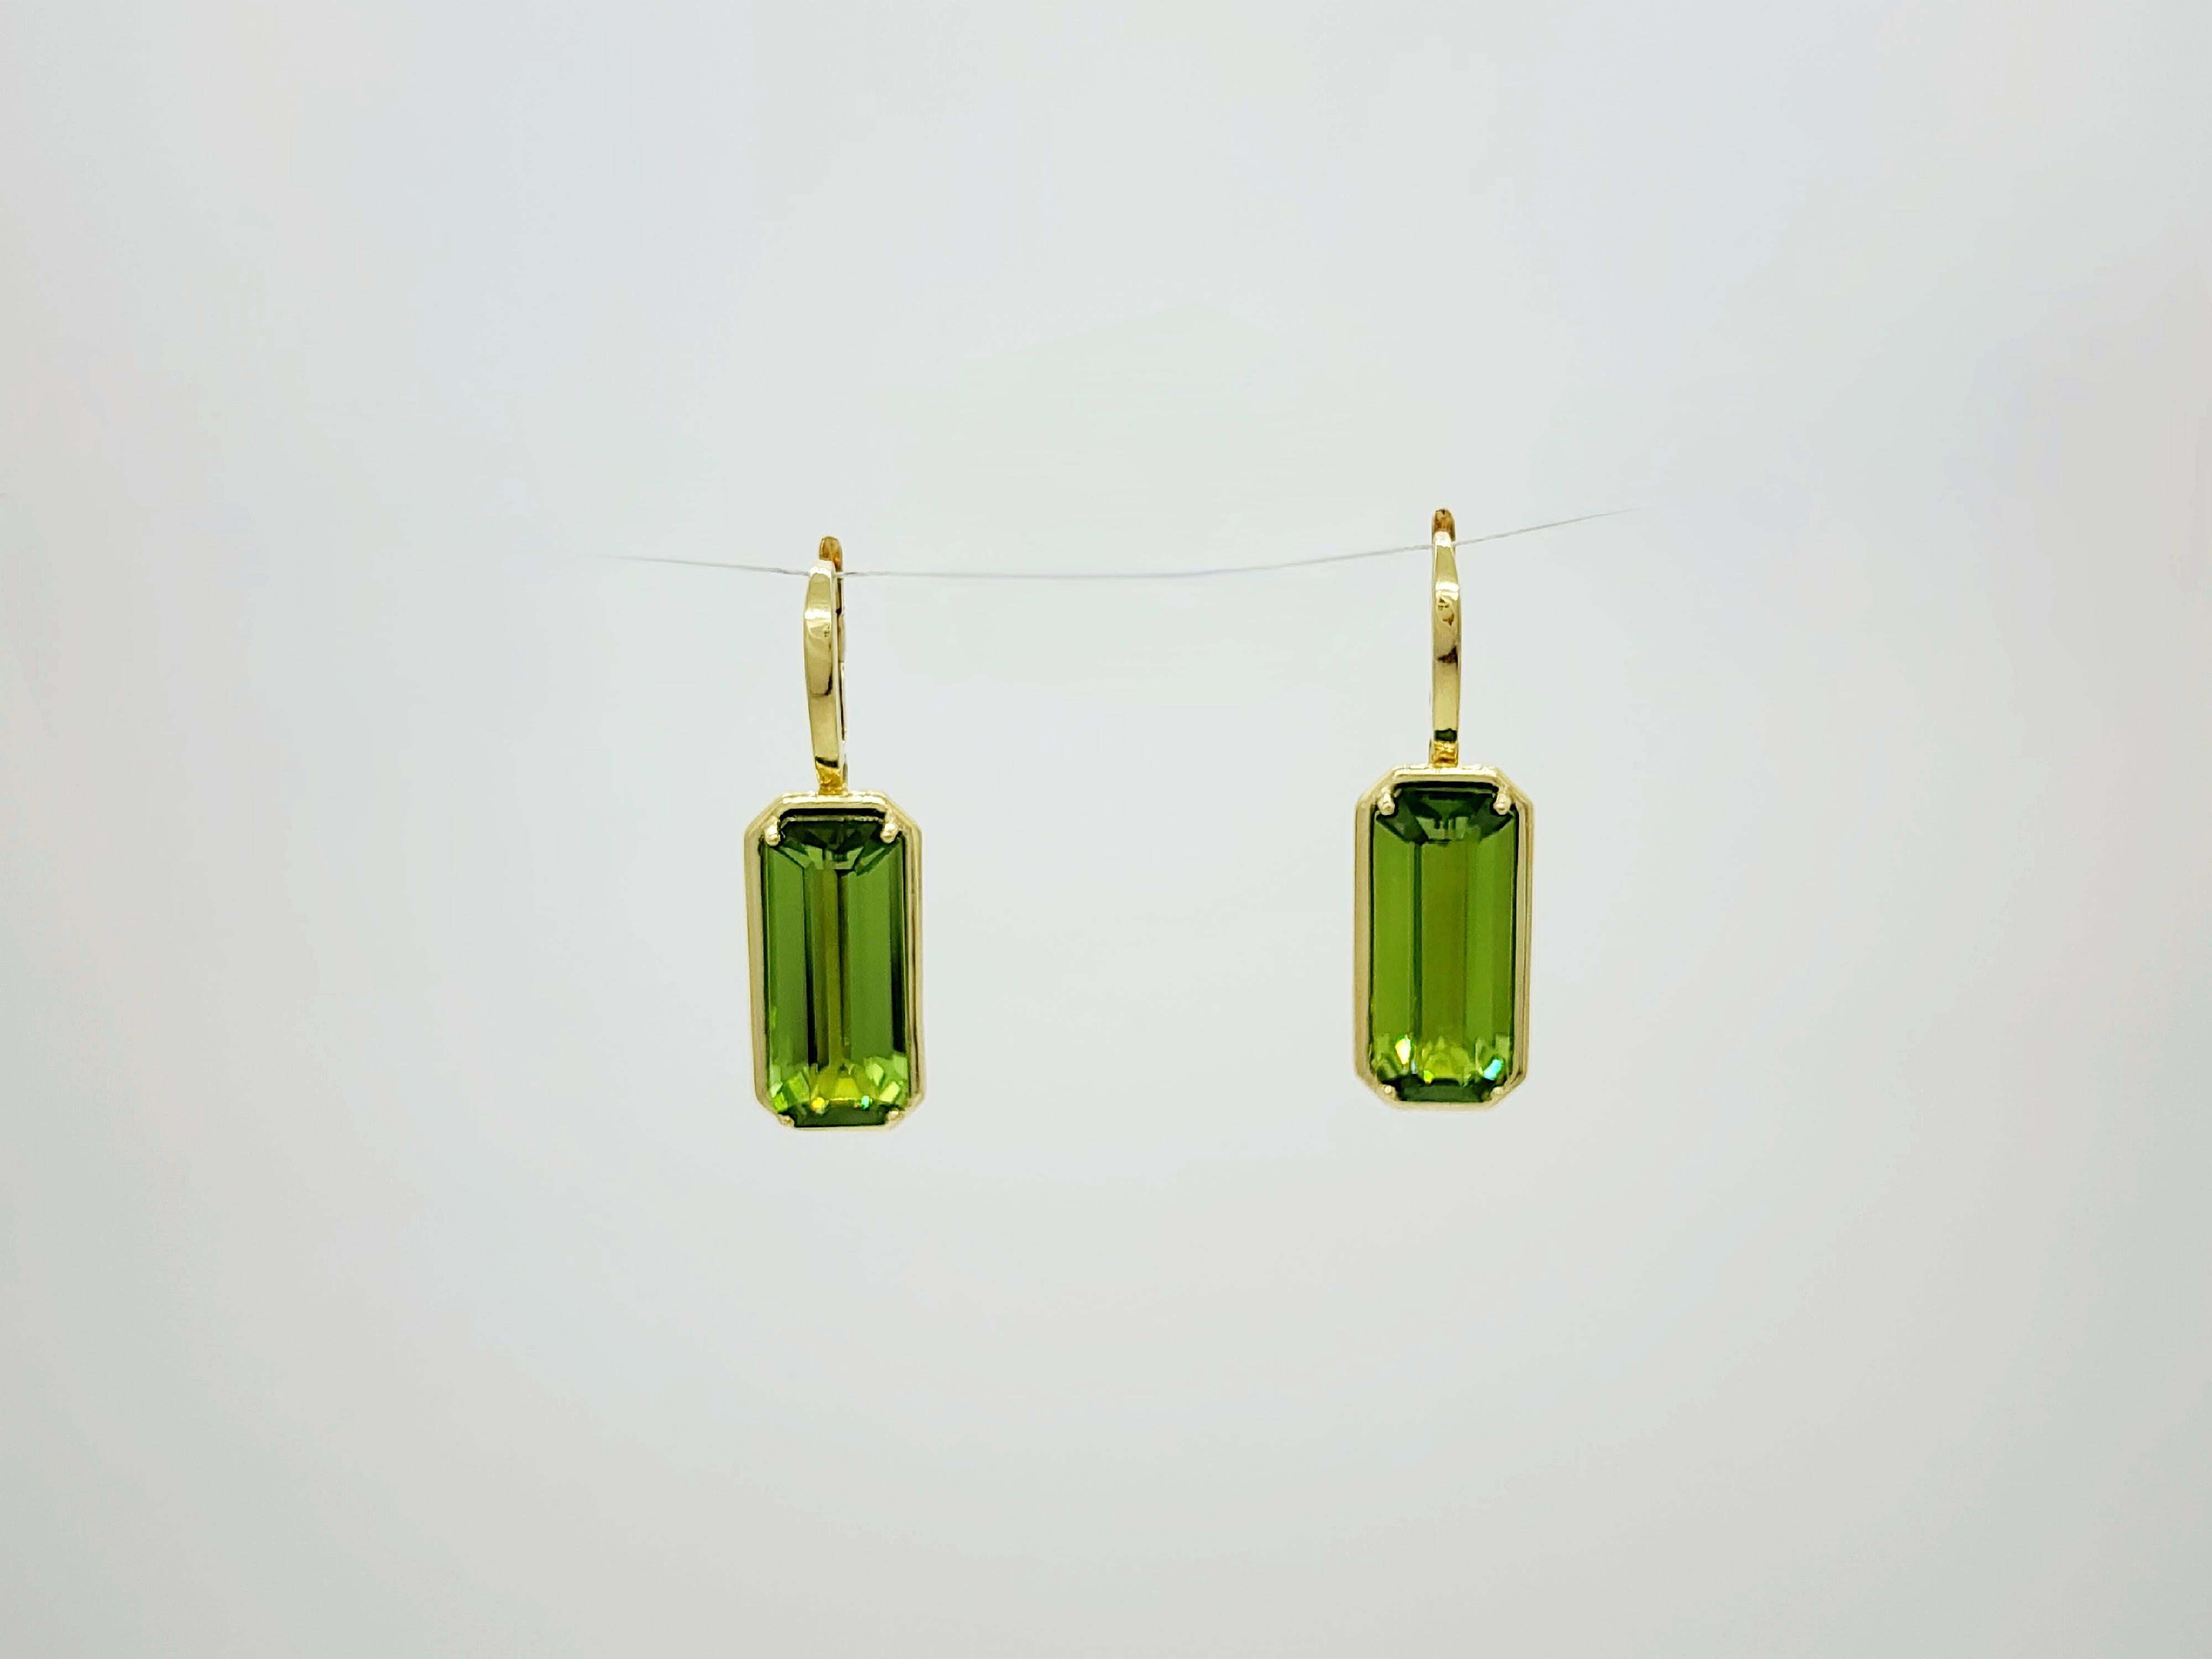 Beautiful 20.06 ct. gem quality emerald cut peridots handmade in 18k yellow gold.  These earrings are chic, easy to wear with any outfit, and classy.